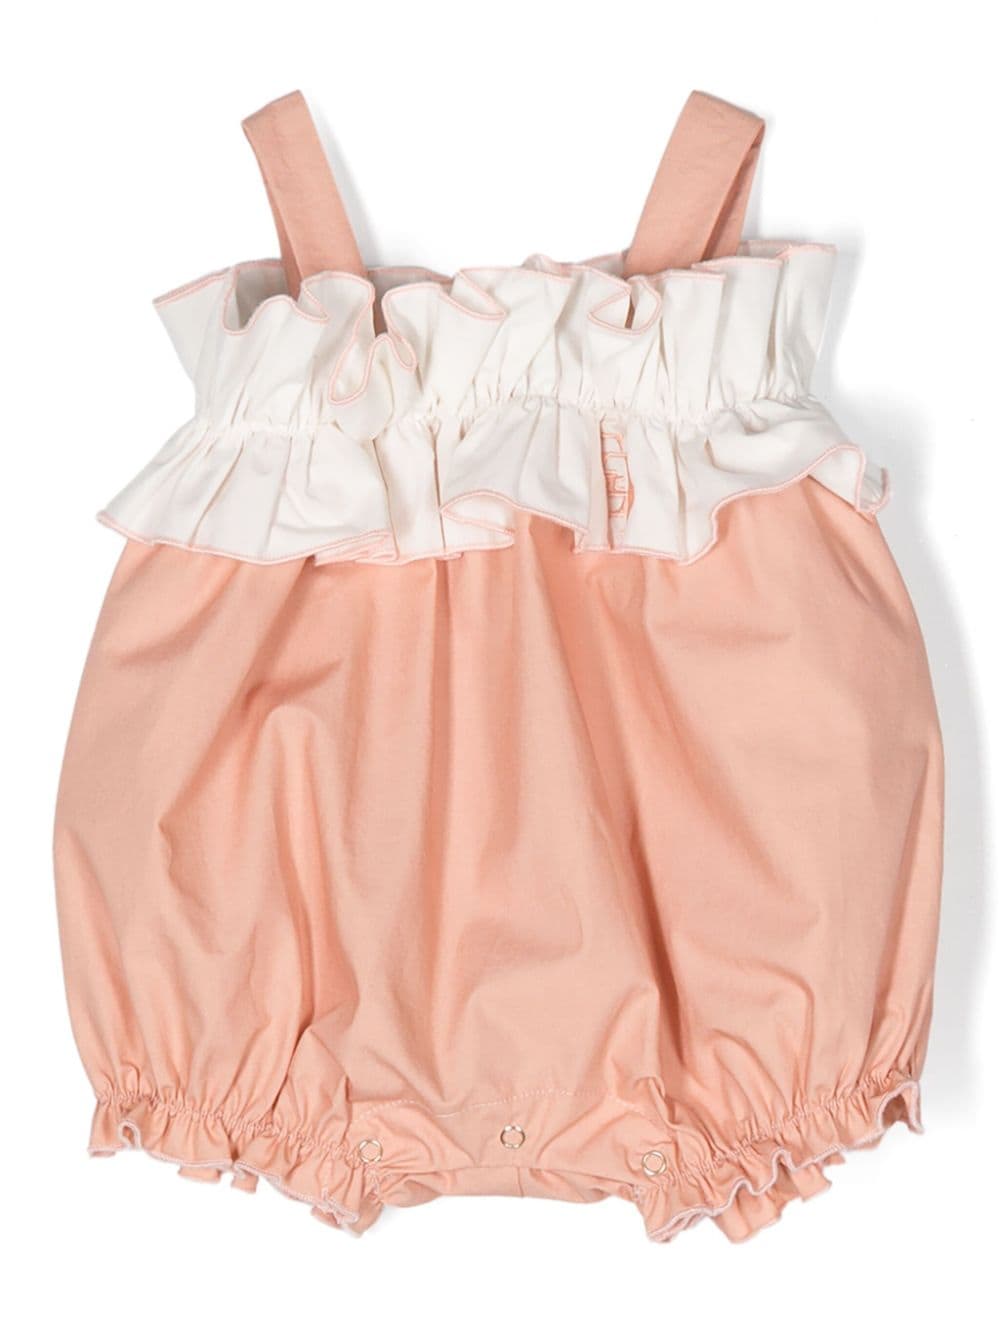 Pink romper for baby girl